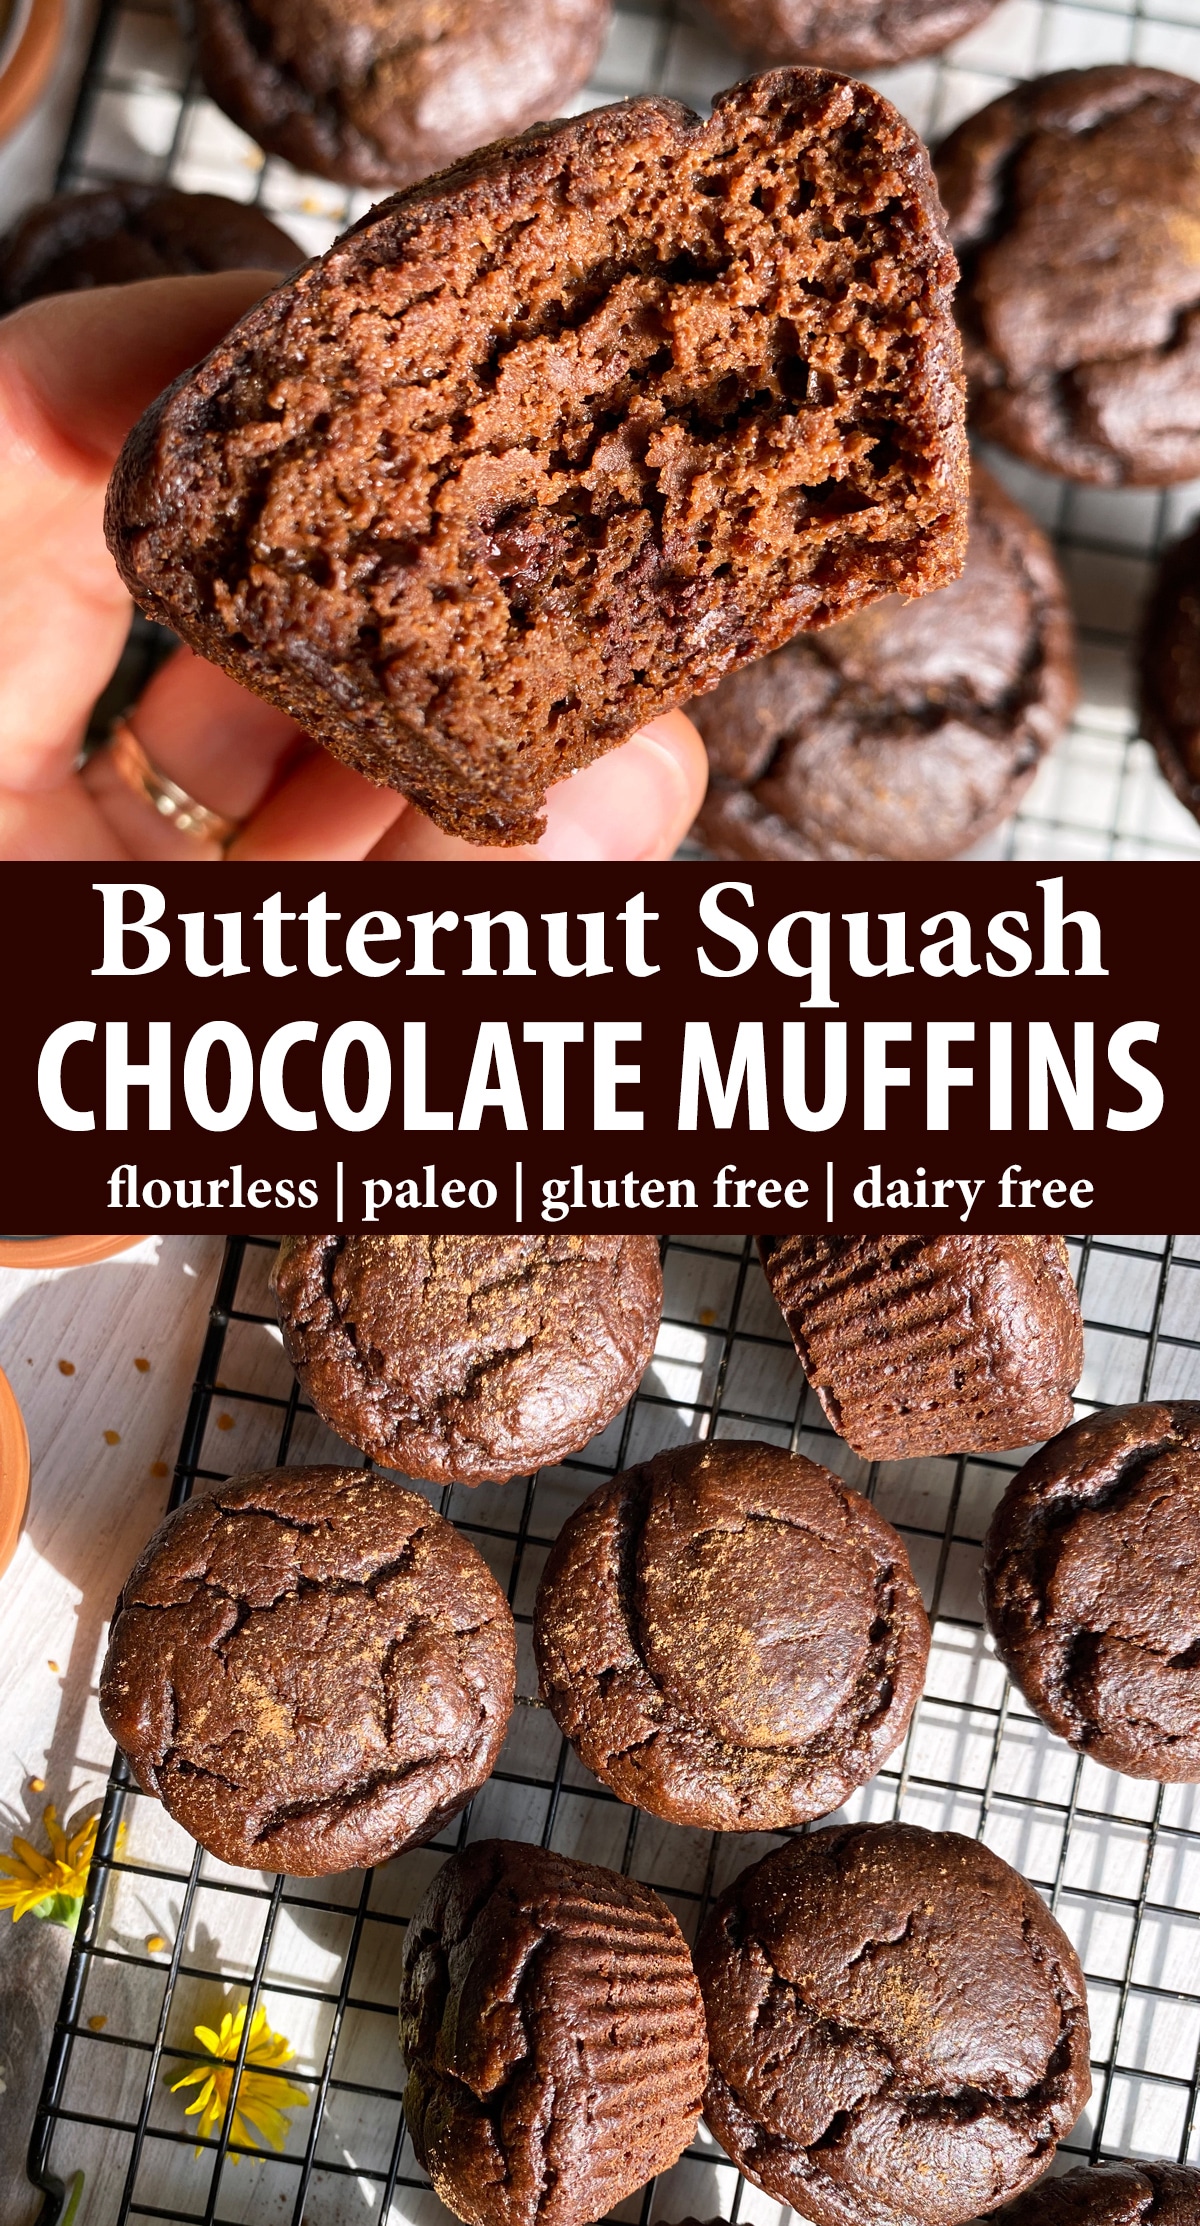 Pinterest image for butternut squash chocolate muffins.